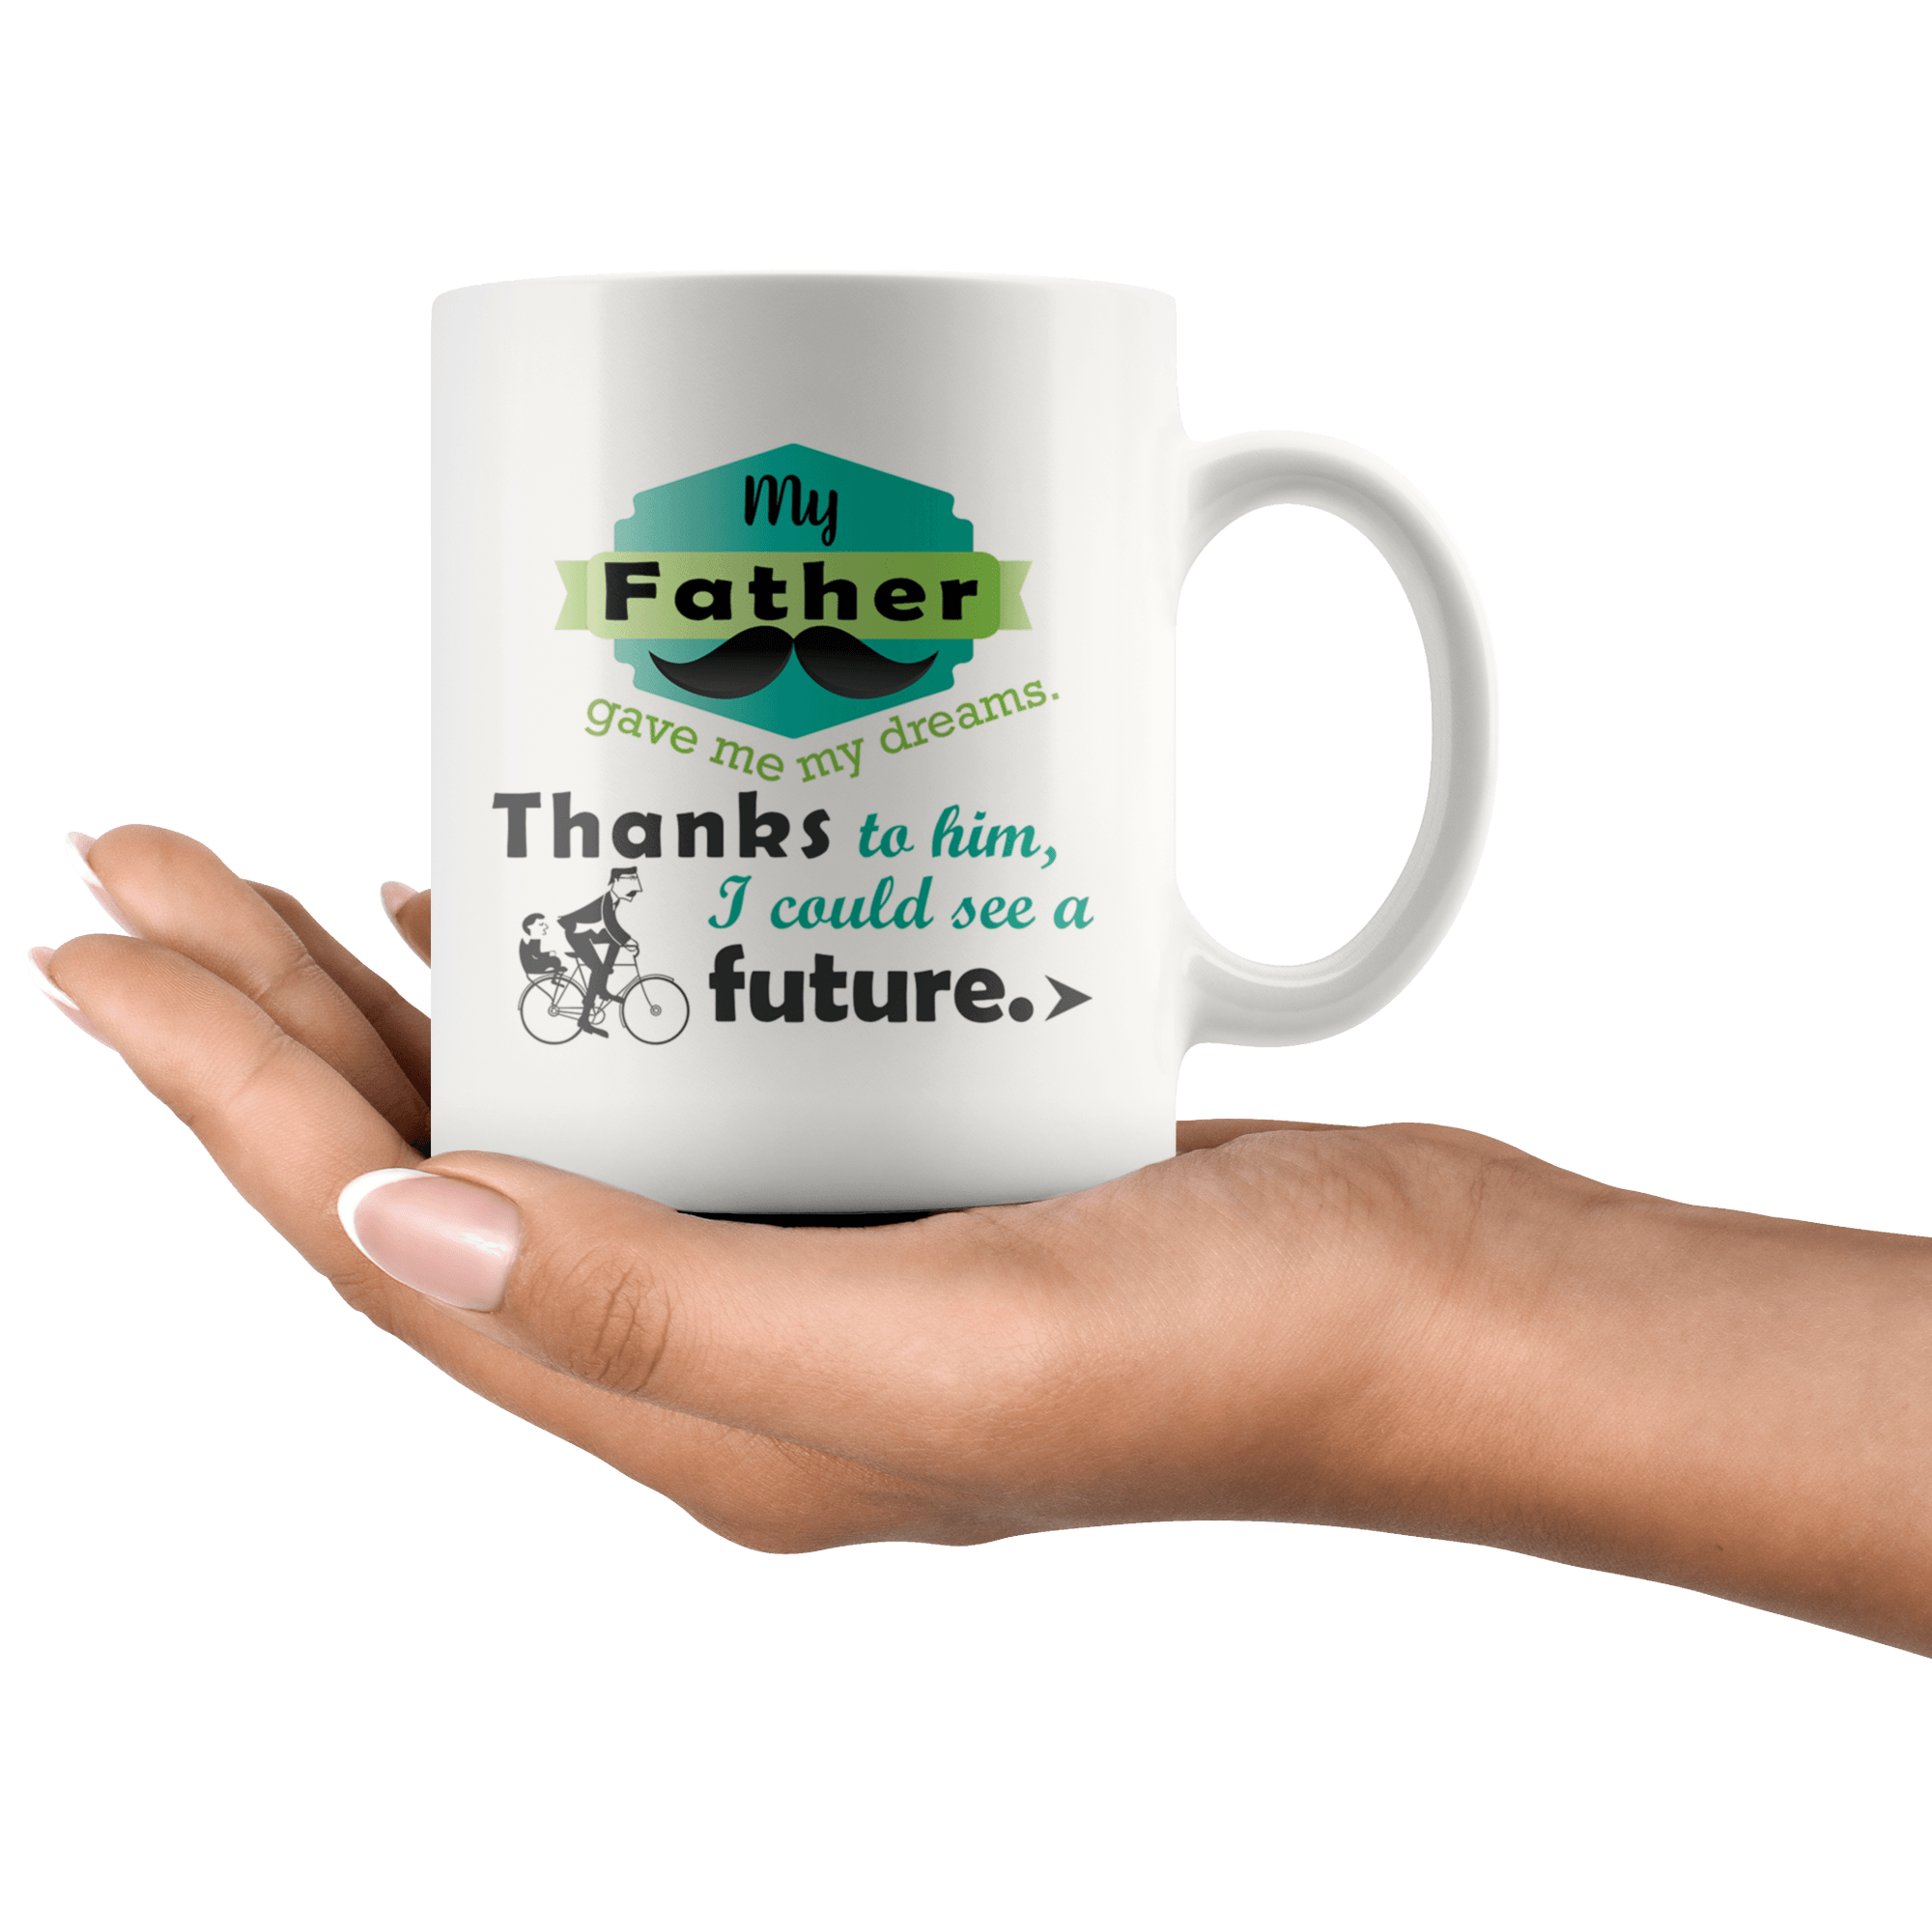 Great Coffee Mug For Father - My Father Gave Me My Dreams. Thanks To Him, I Could See A Future. - SPCM